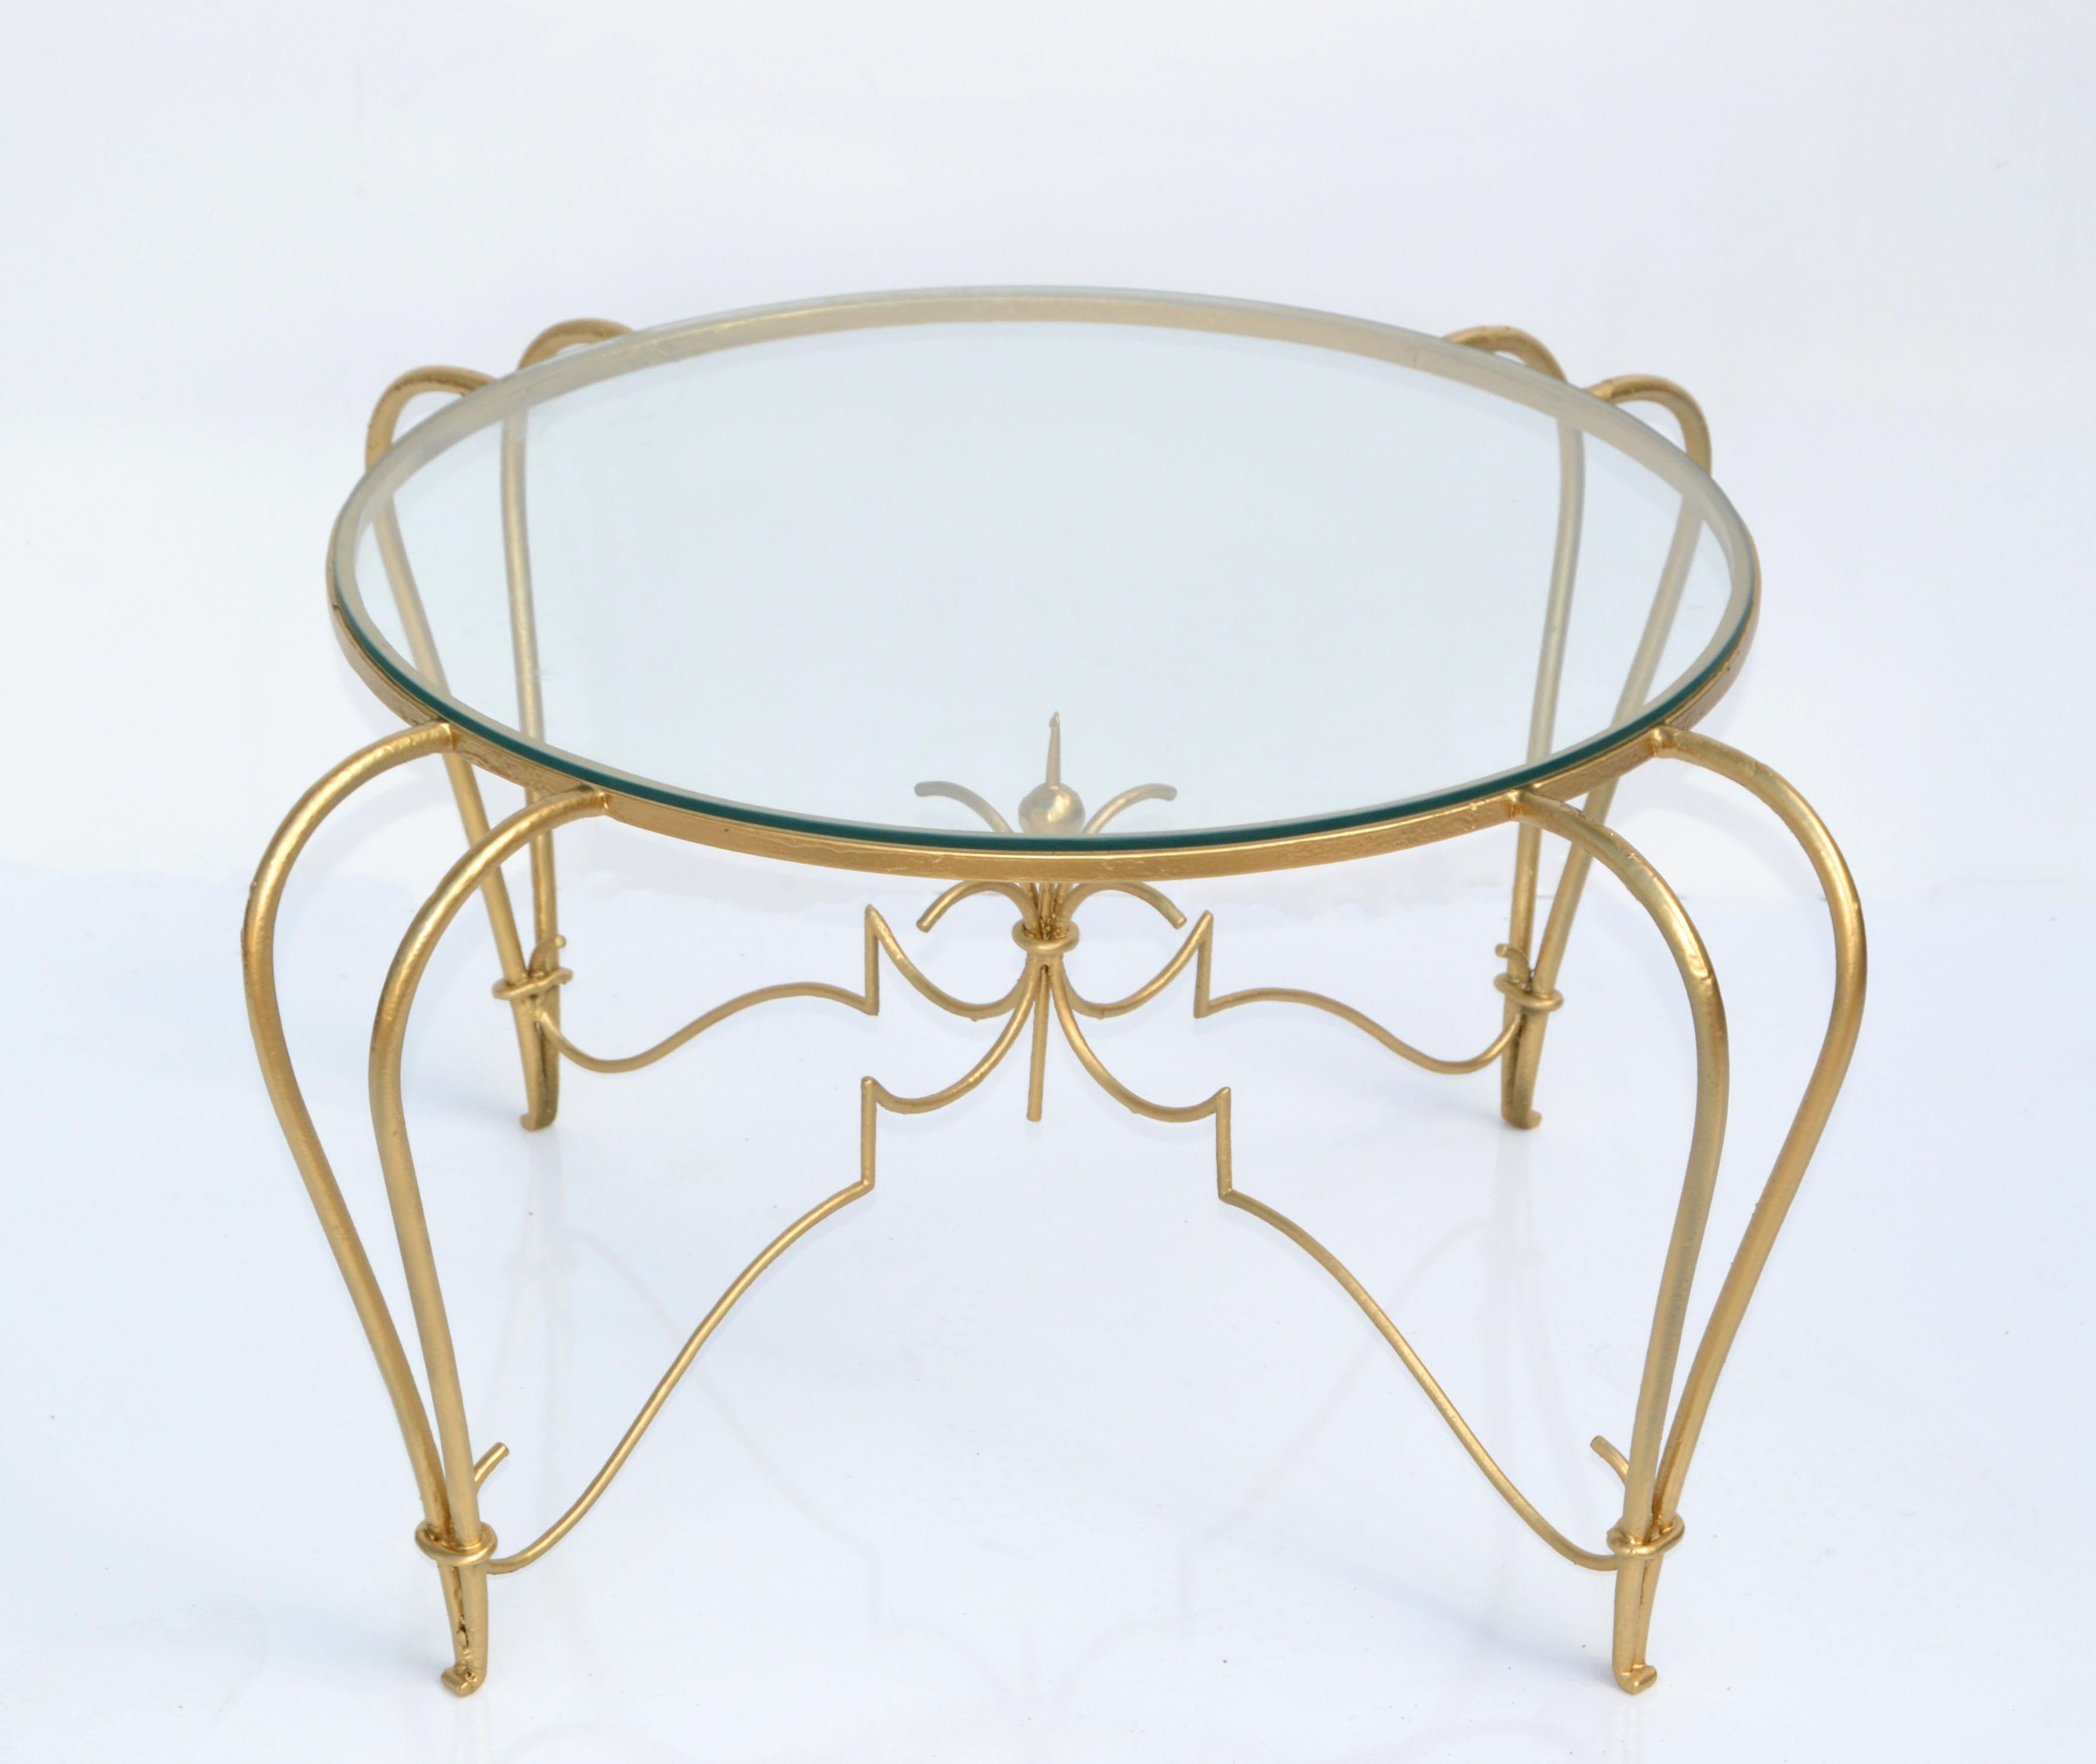 Superb Art Deco gold finish round wrought iron coffee or cocktail table with round glass top, made in France 1950.
Round glass measures: 24 inches Diameter & 0.25 inches thick.
Very good condition with some scuffs to the gold finish due to use and